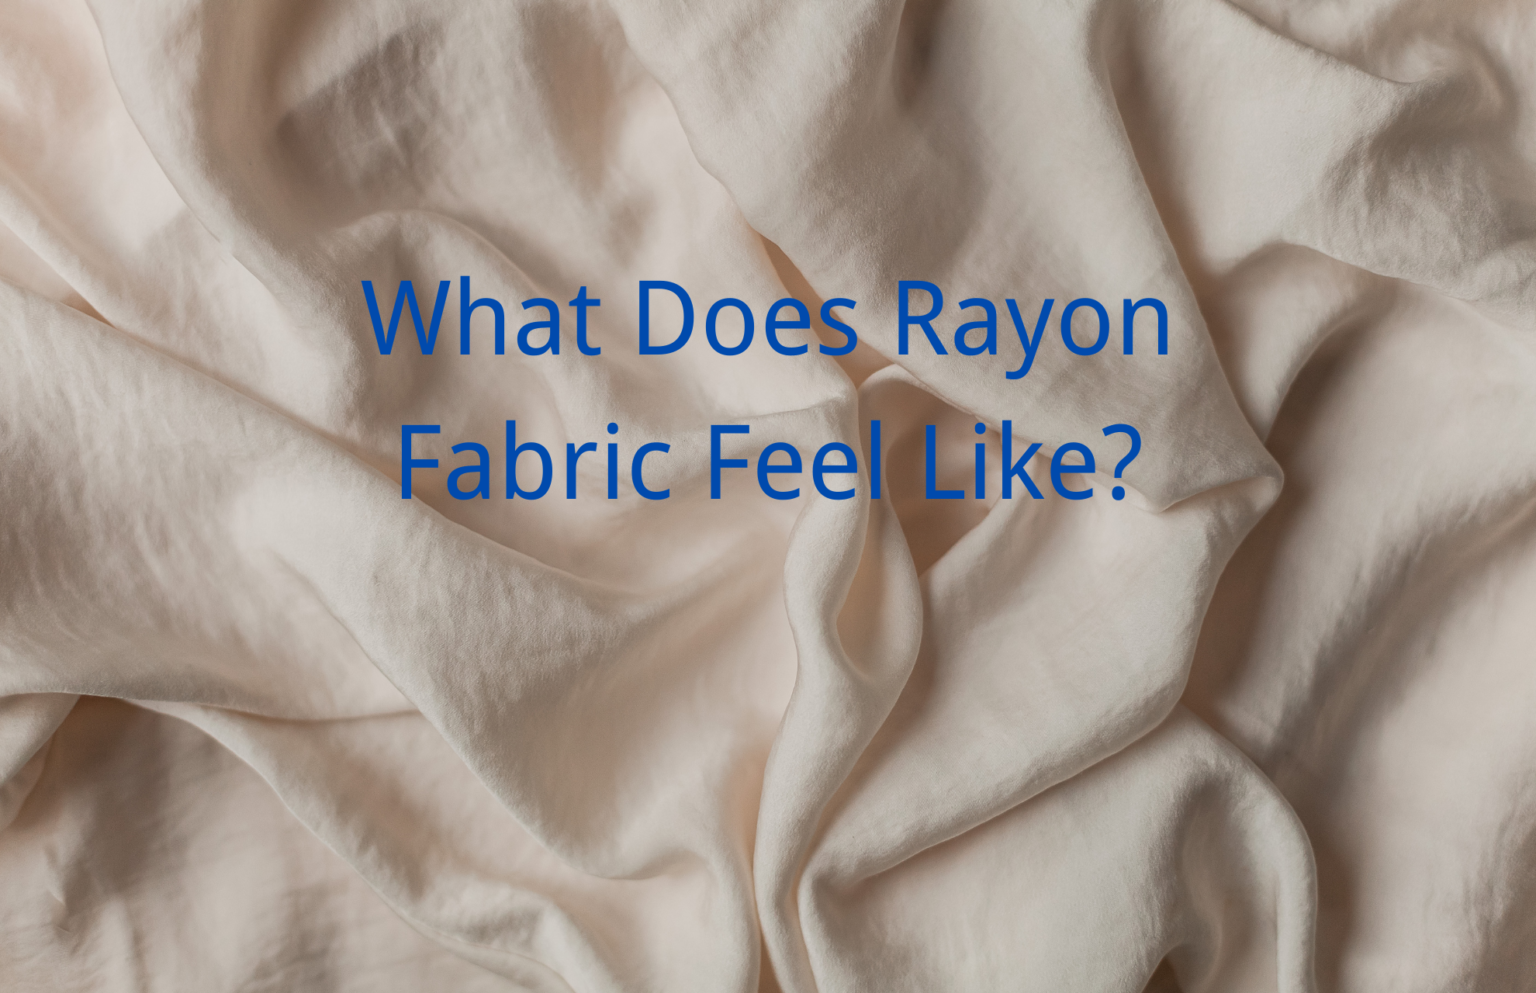 What Does Rayon Fabric Feel Like? the Feel of Rayon - Display Cloths